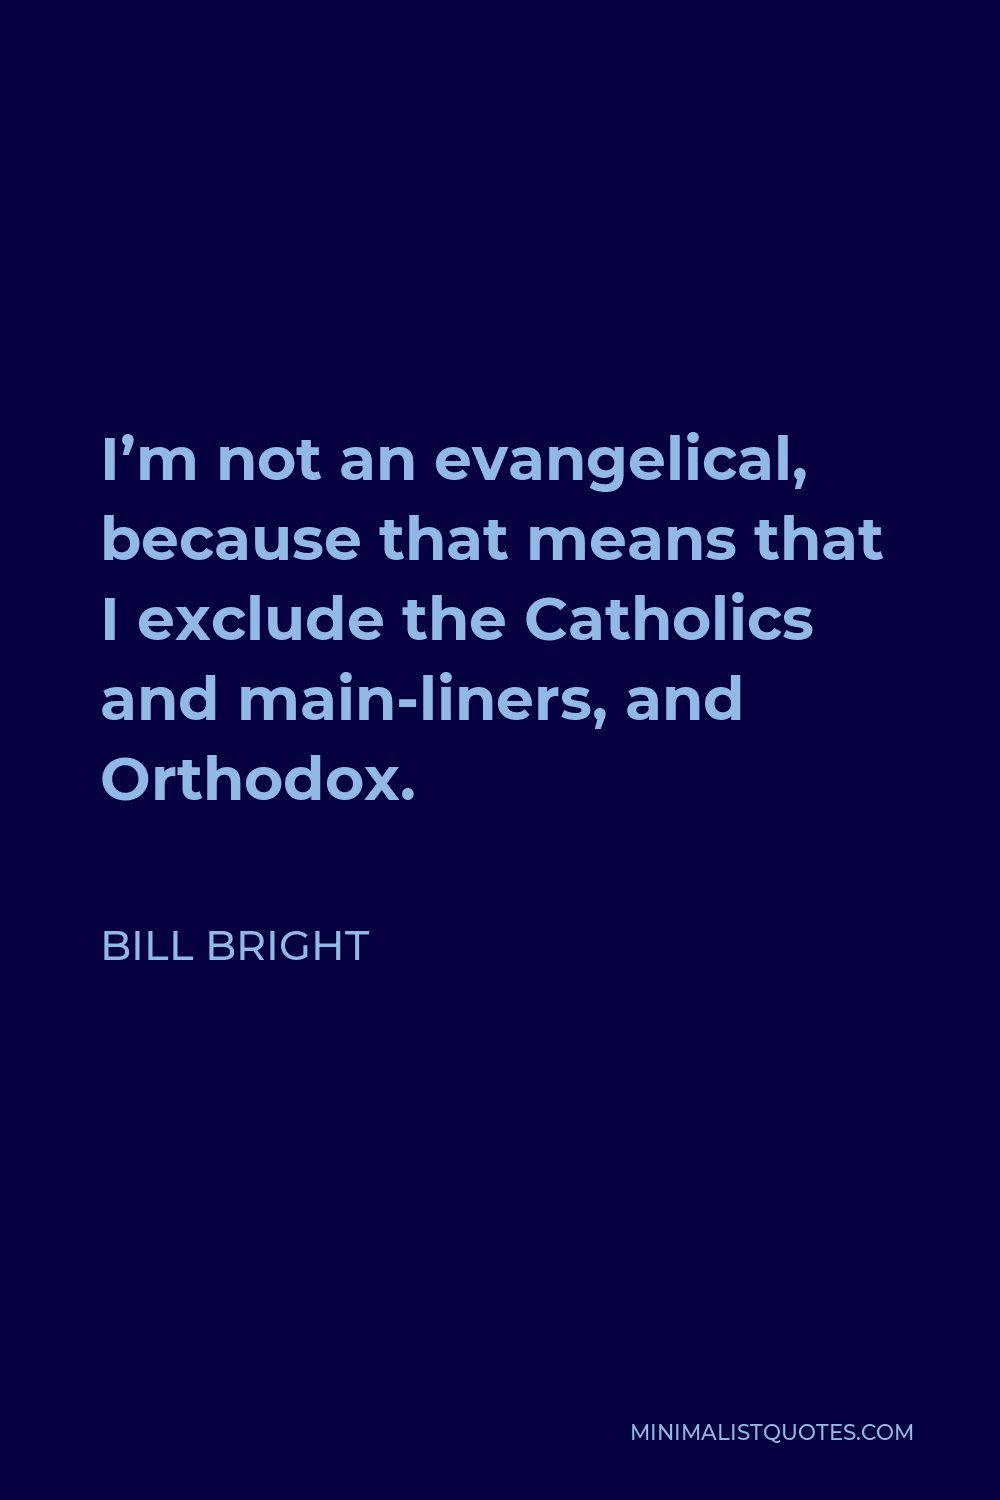 Bill Bright Quote - I’m not an evangelical, because that means that I exclude the Catholics and main-liners, and Orthodox.